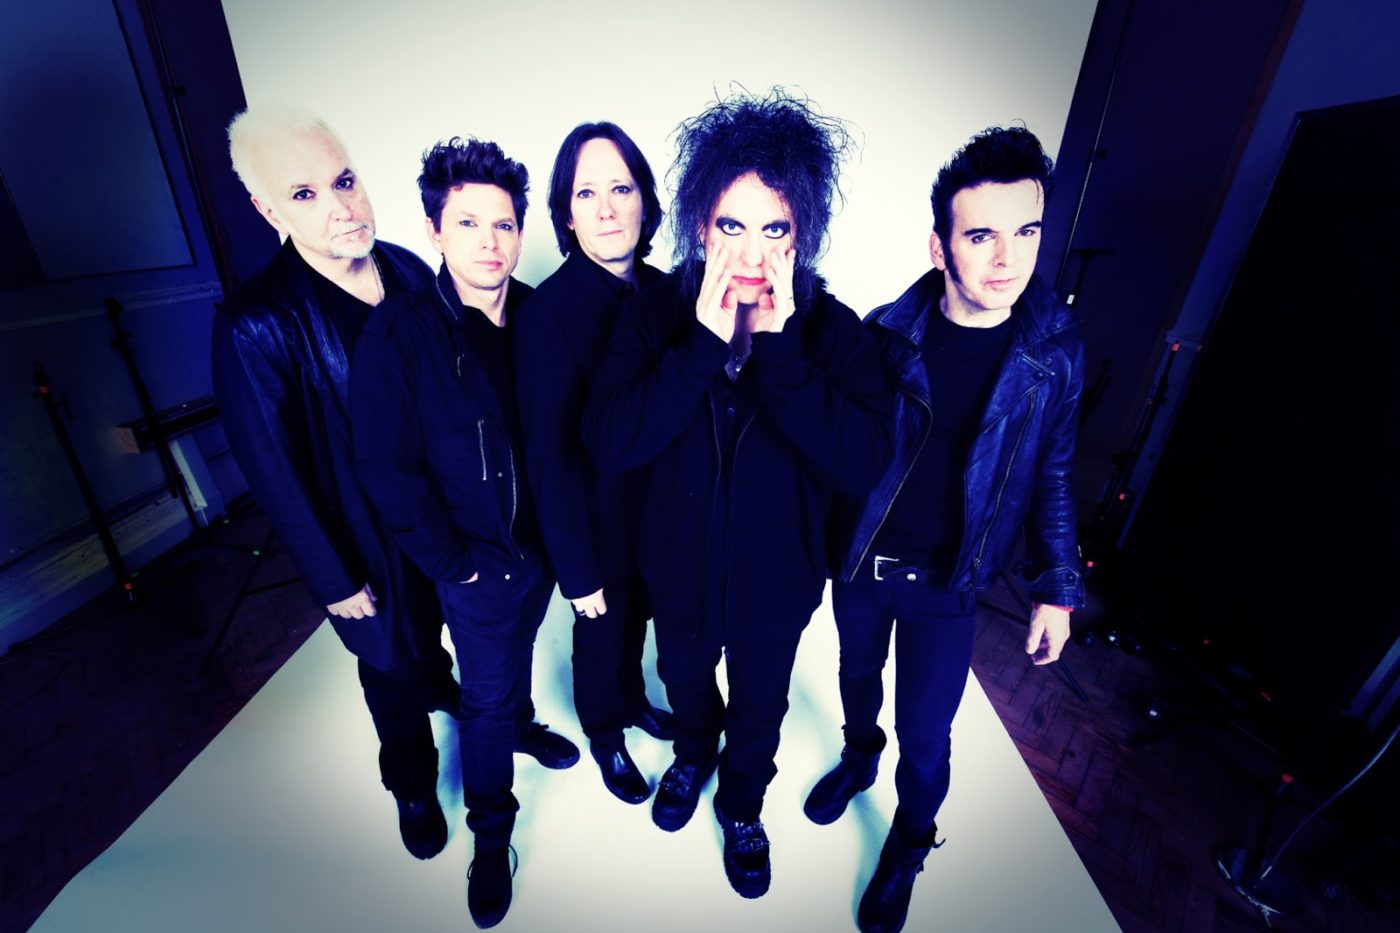 who is on tour with the cure